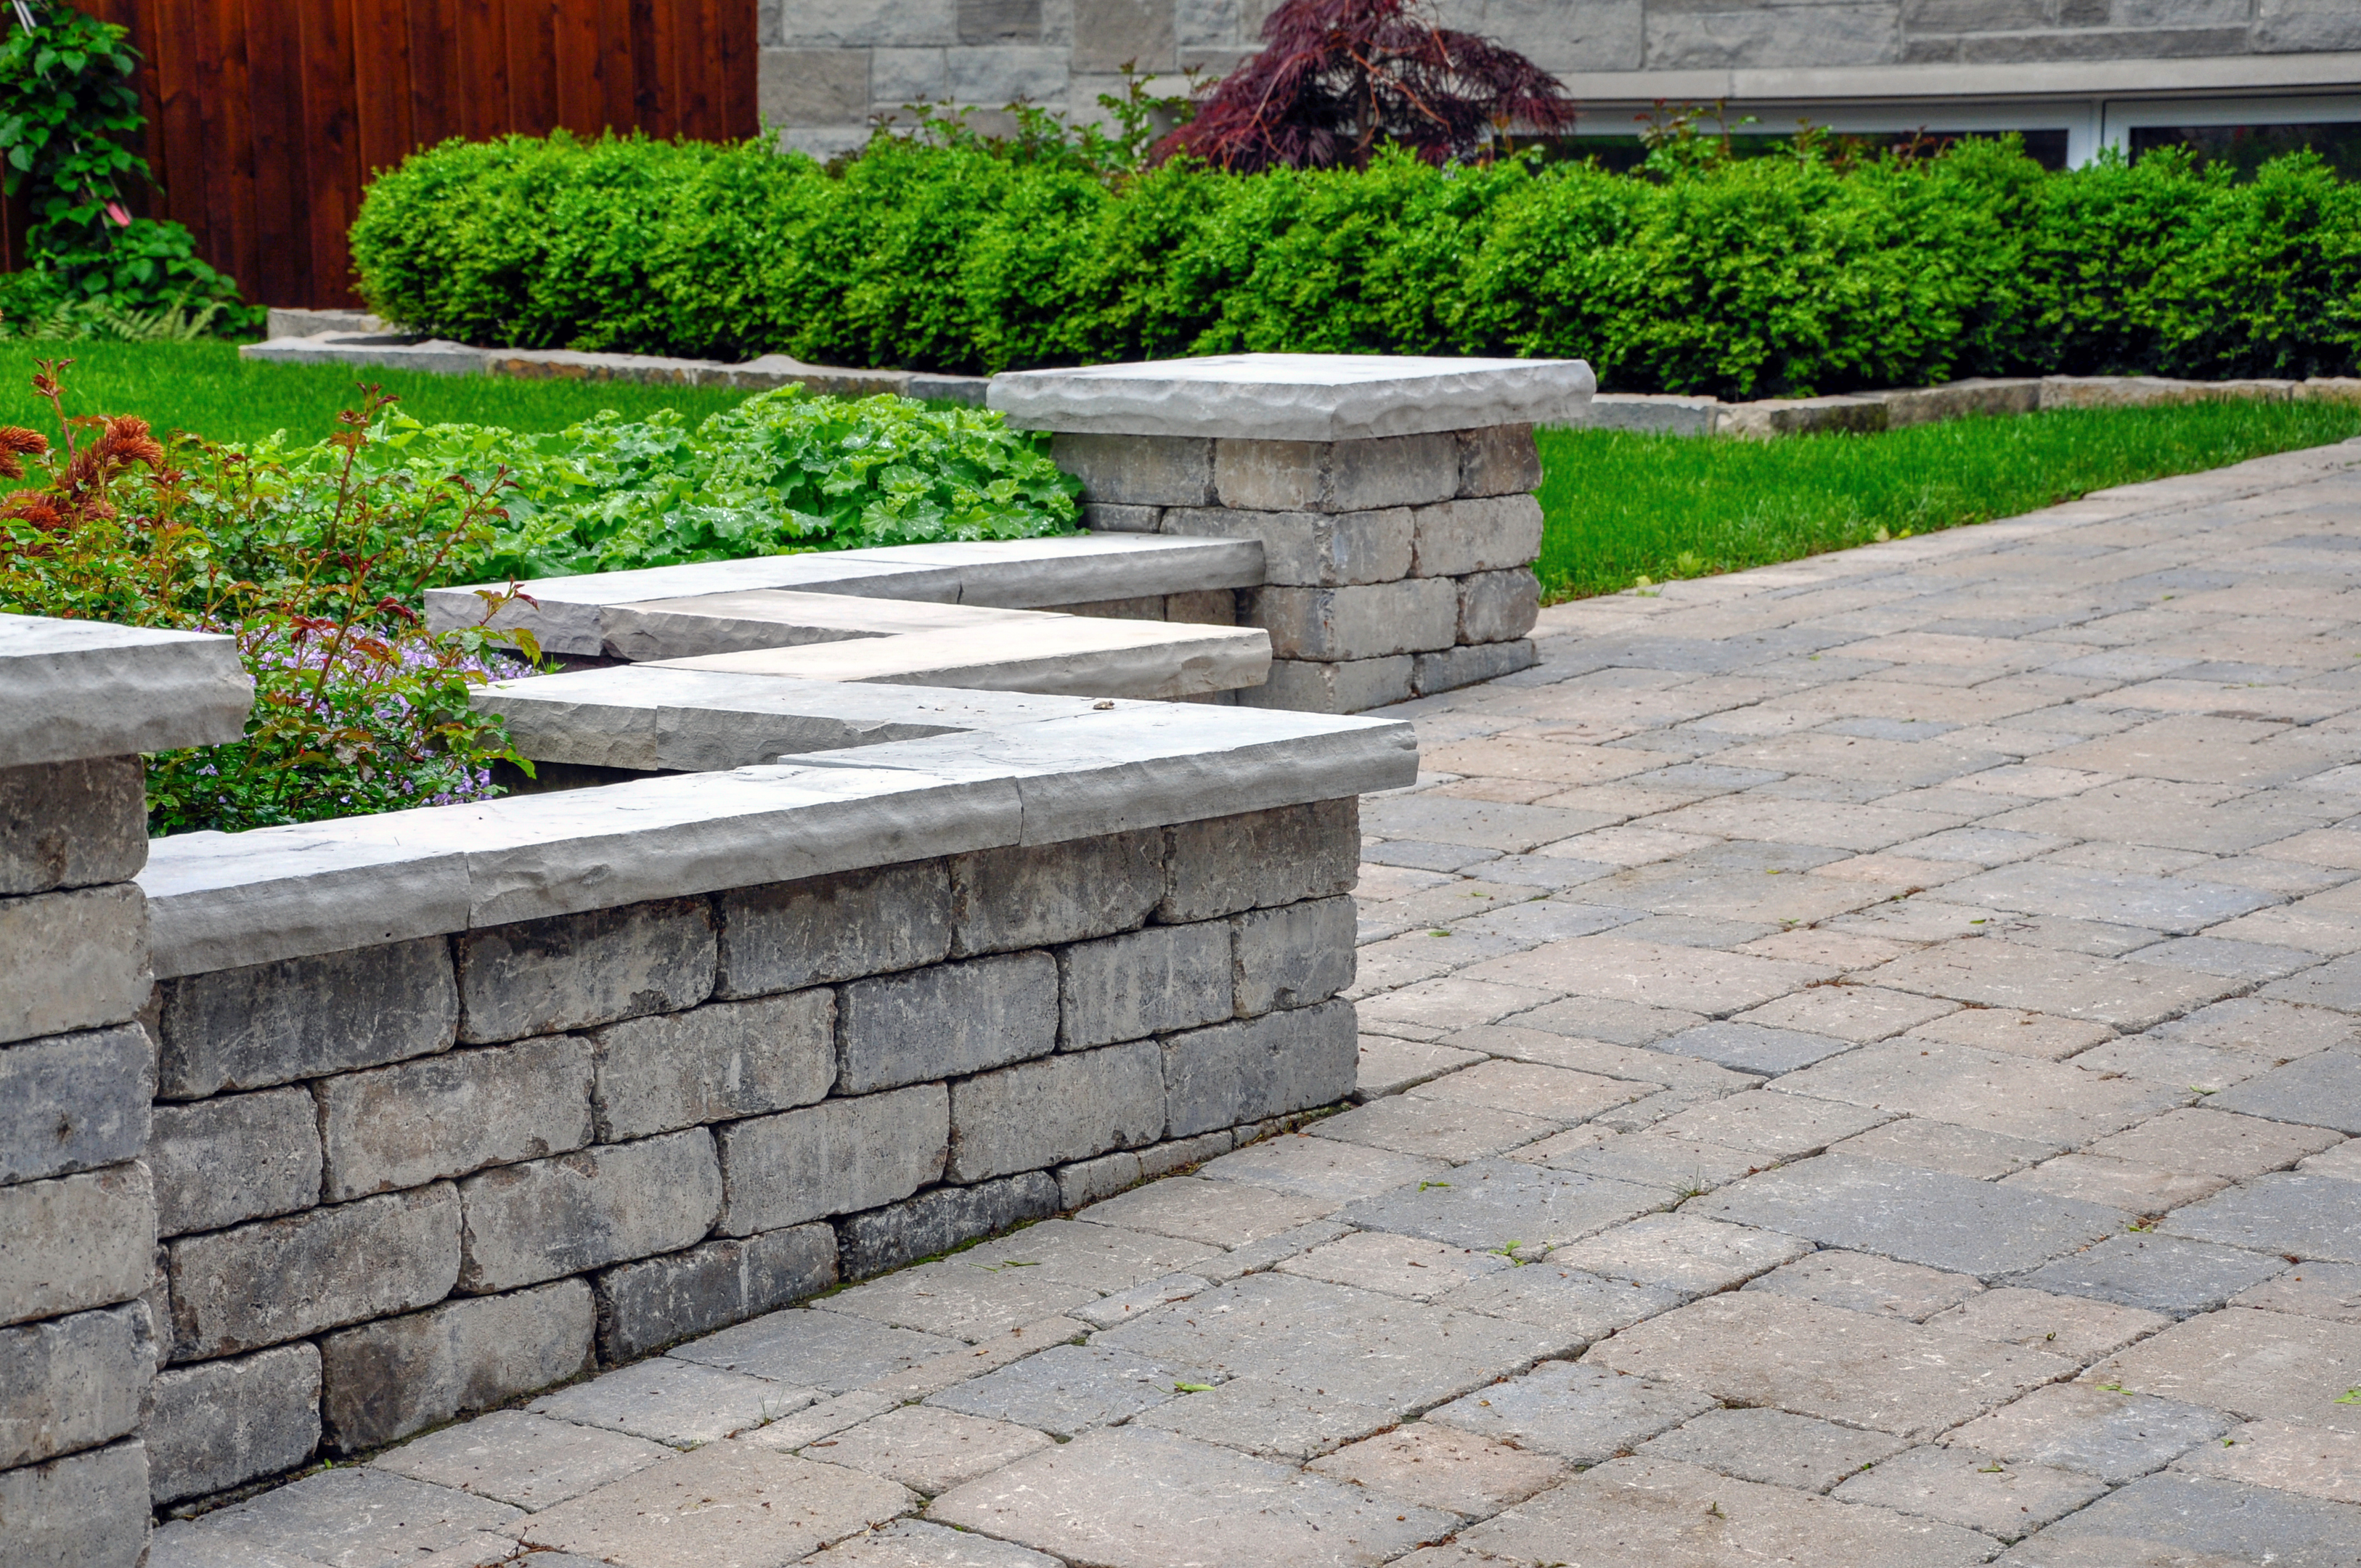 This natural stone can double as a seating area if needed